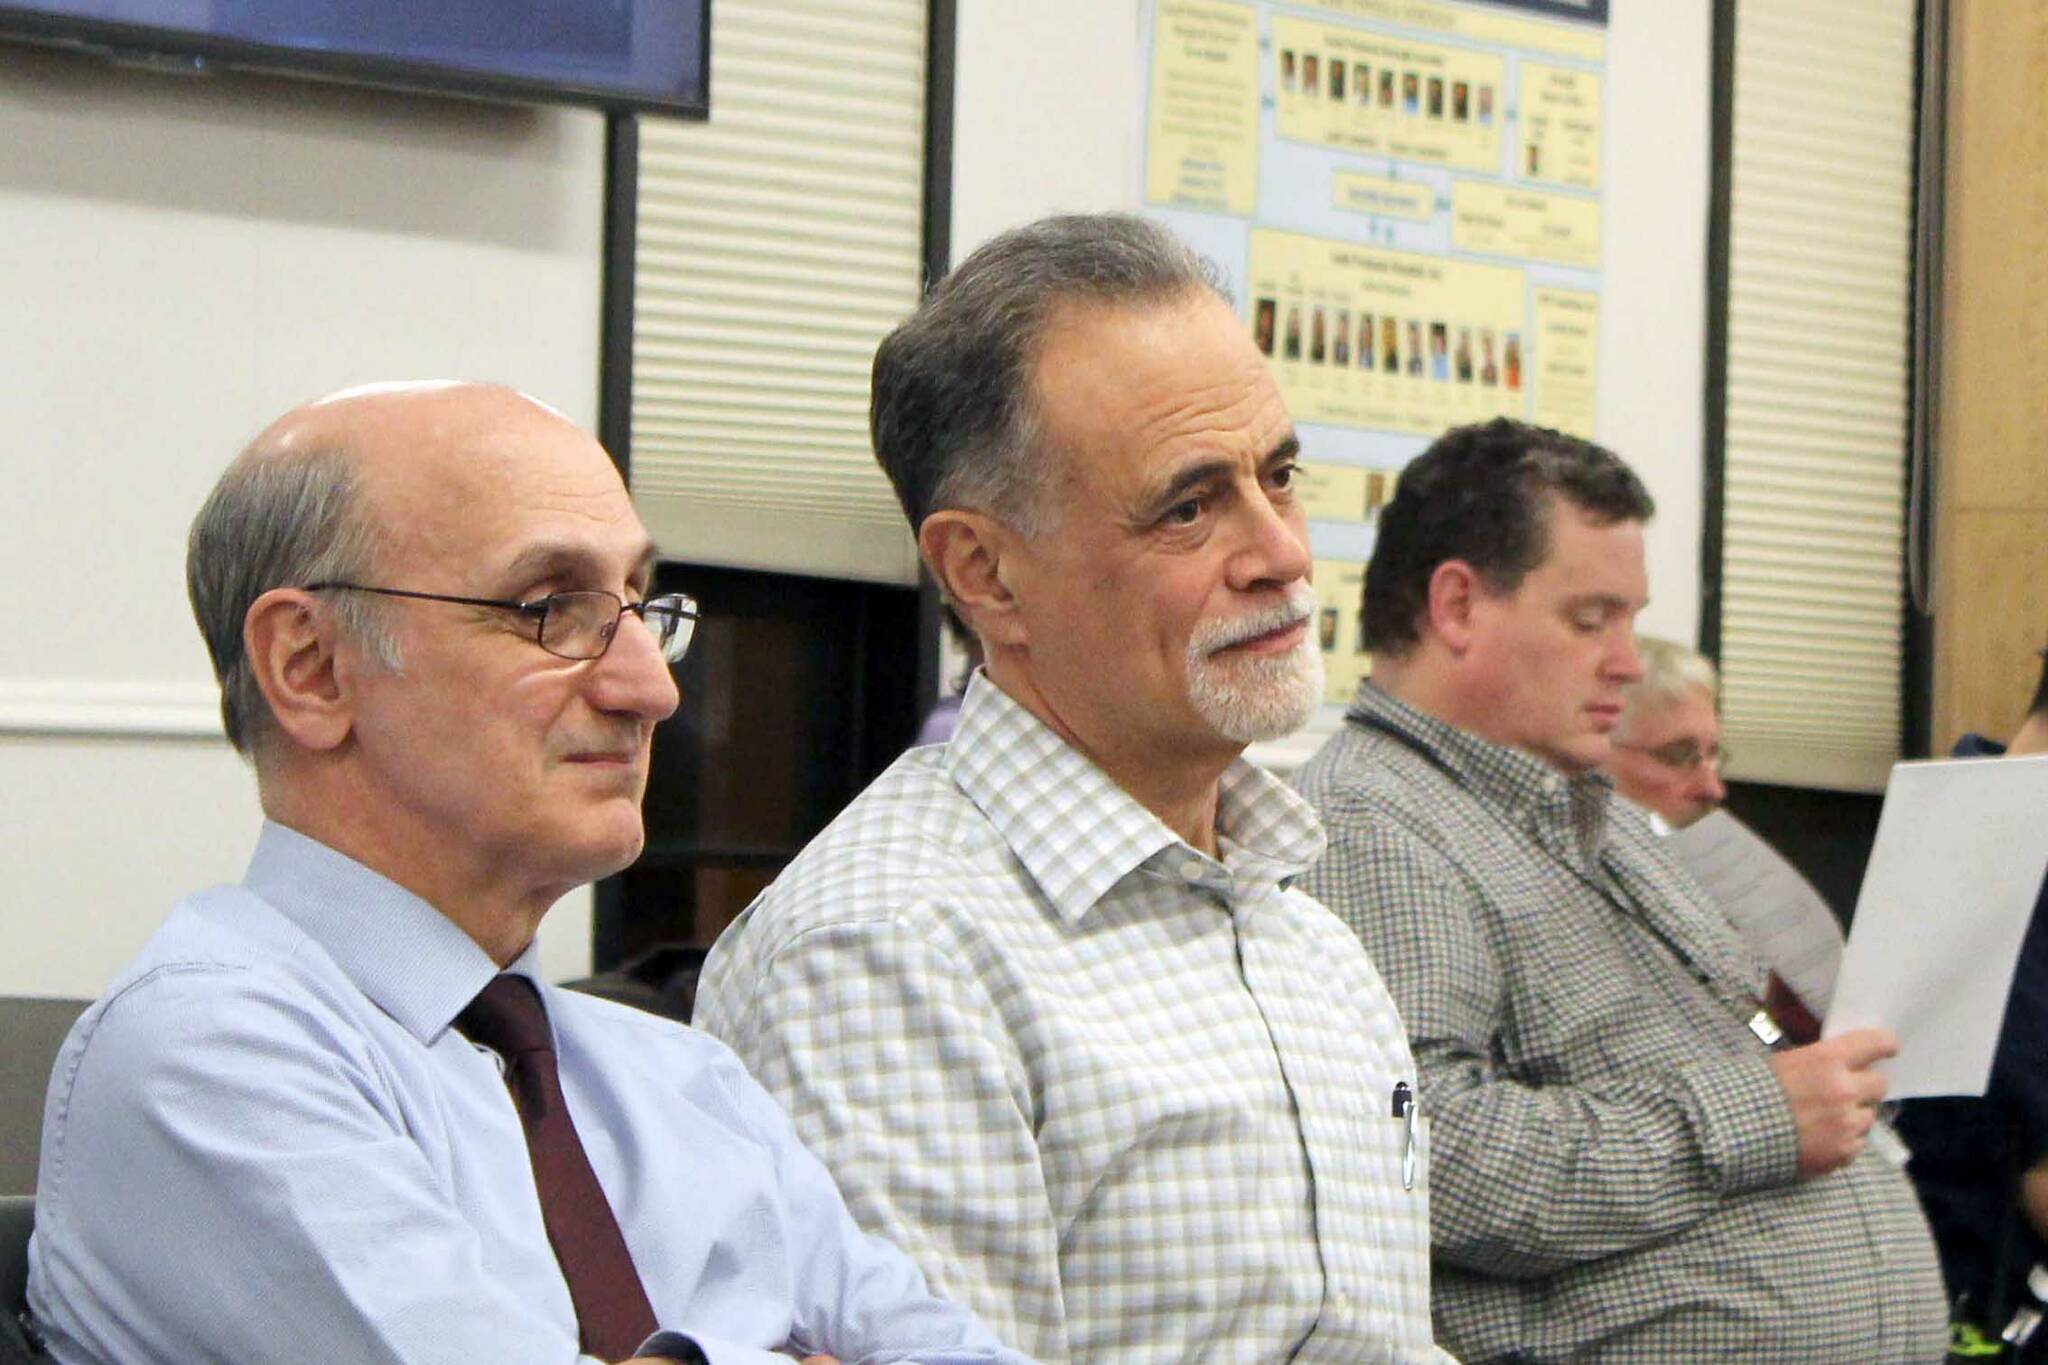 Peter Micciche (center) listens to the Kenai Peninsula Borough Assembly certify the results of the Feb. 14, 2023, special mayoral election, through which he was elected mayor of the Kenai Peninsula Borough, on Tuesday, Feb. 21, 2023 in Soldotna, Alaska. (Ashlyn O'Hara/Peninsula Clarion)